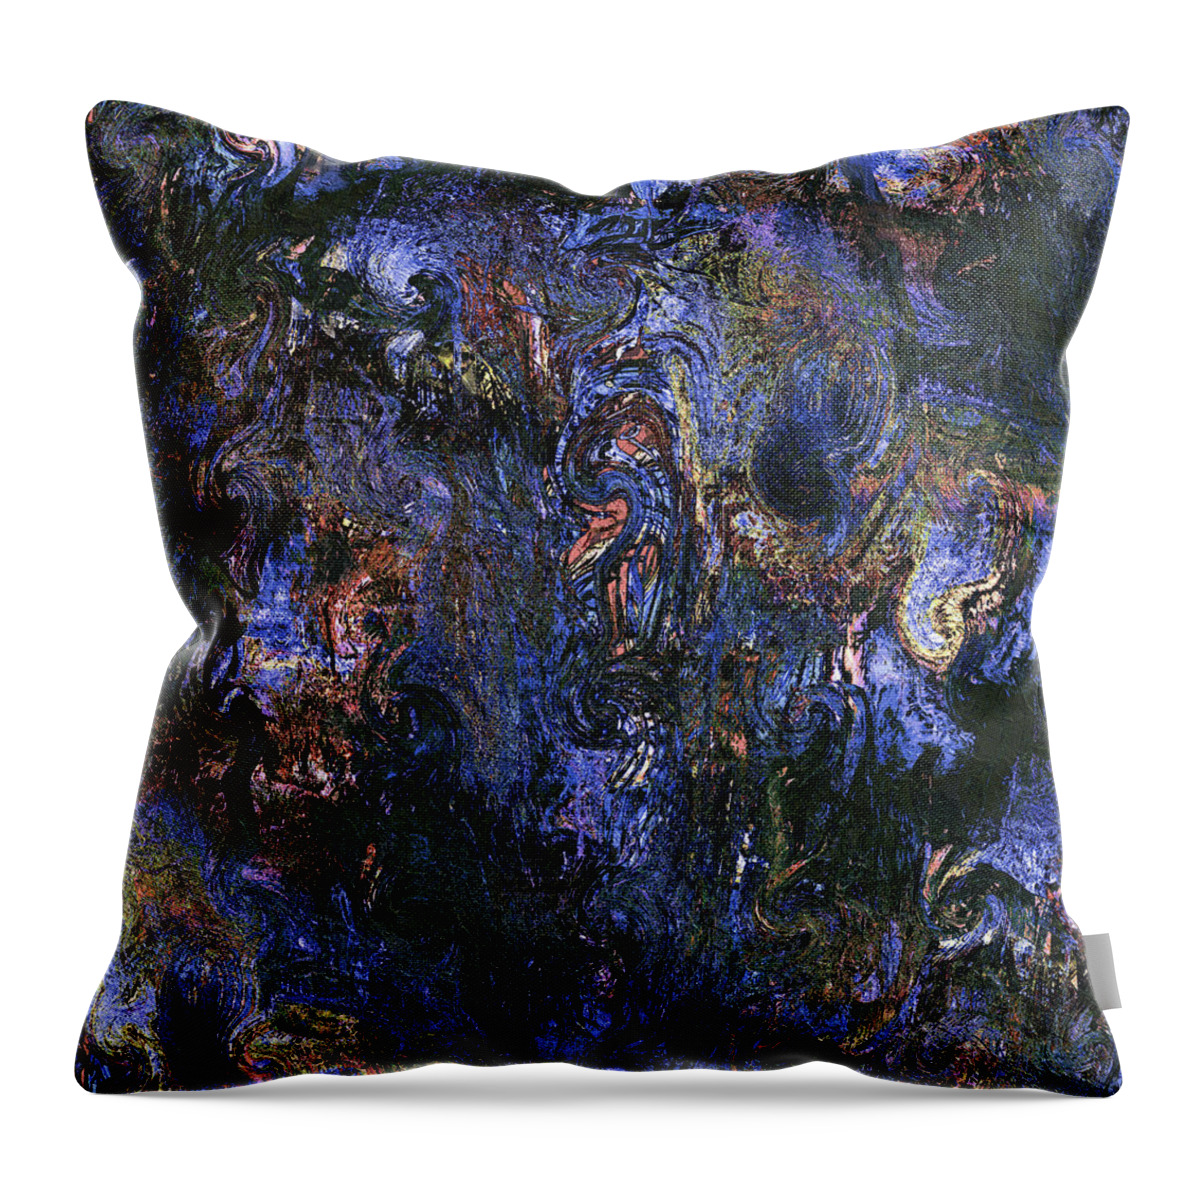 Ghosts Throw Pillow featuring the painting Ghosts by Natalie Holland